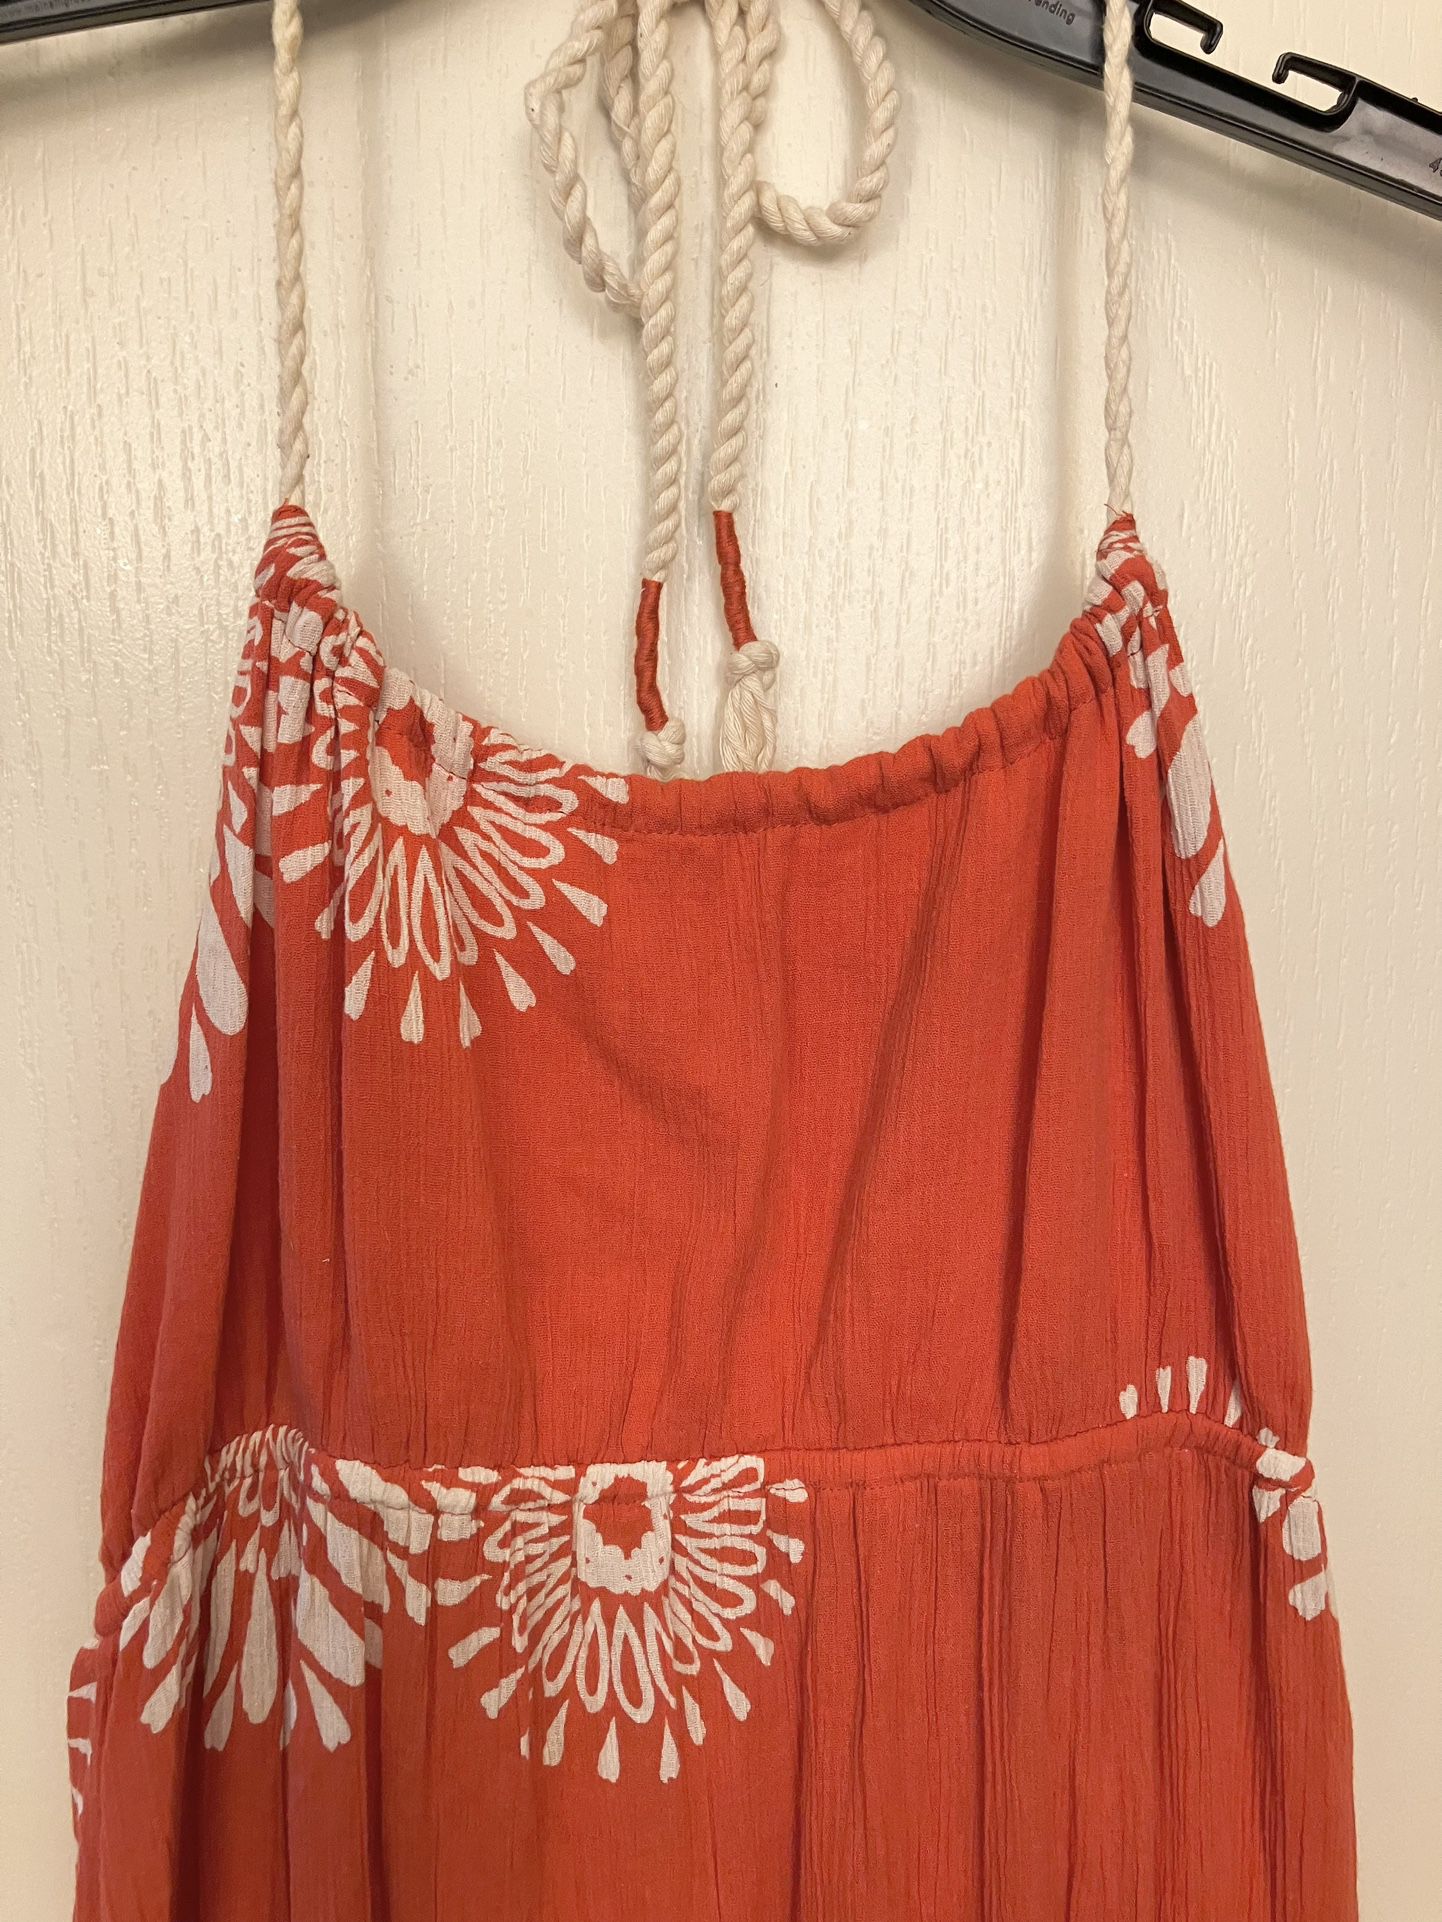 Roxy Brand Poppy Colored Maxi Halter Dress New Without Tags Size Extra Large